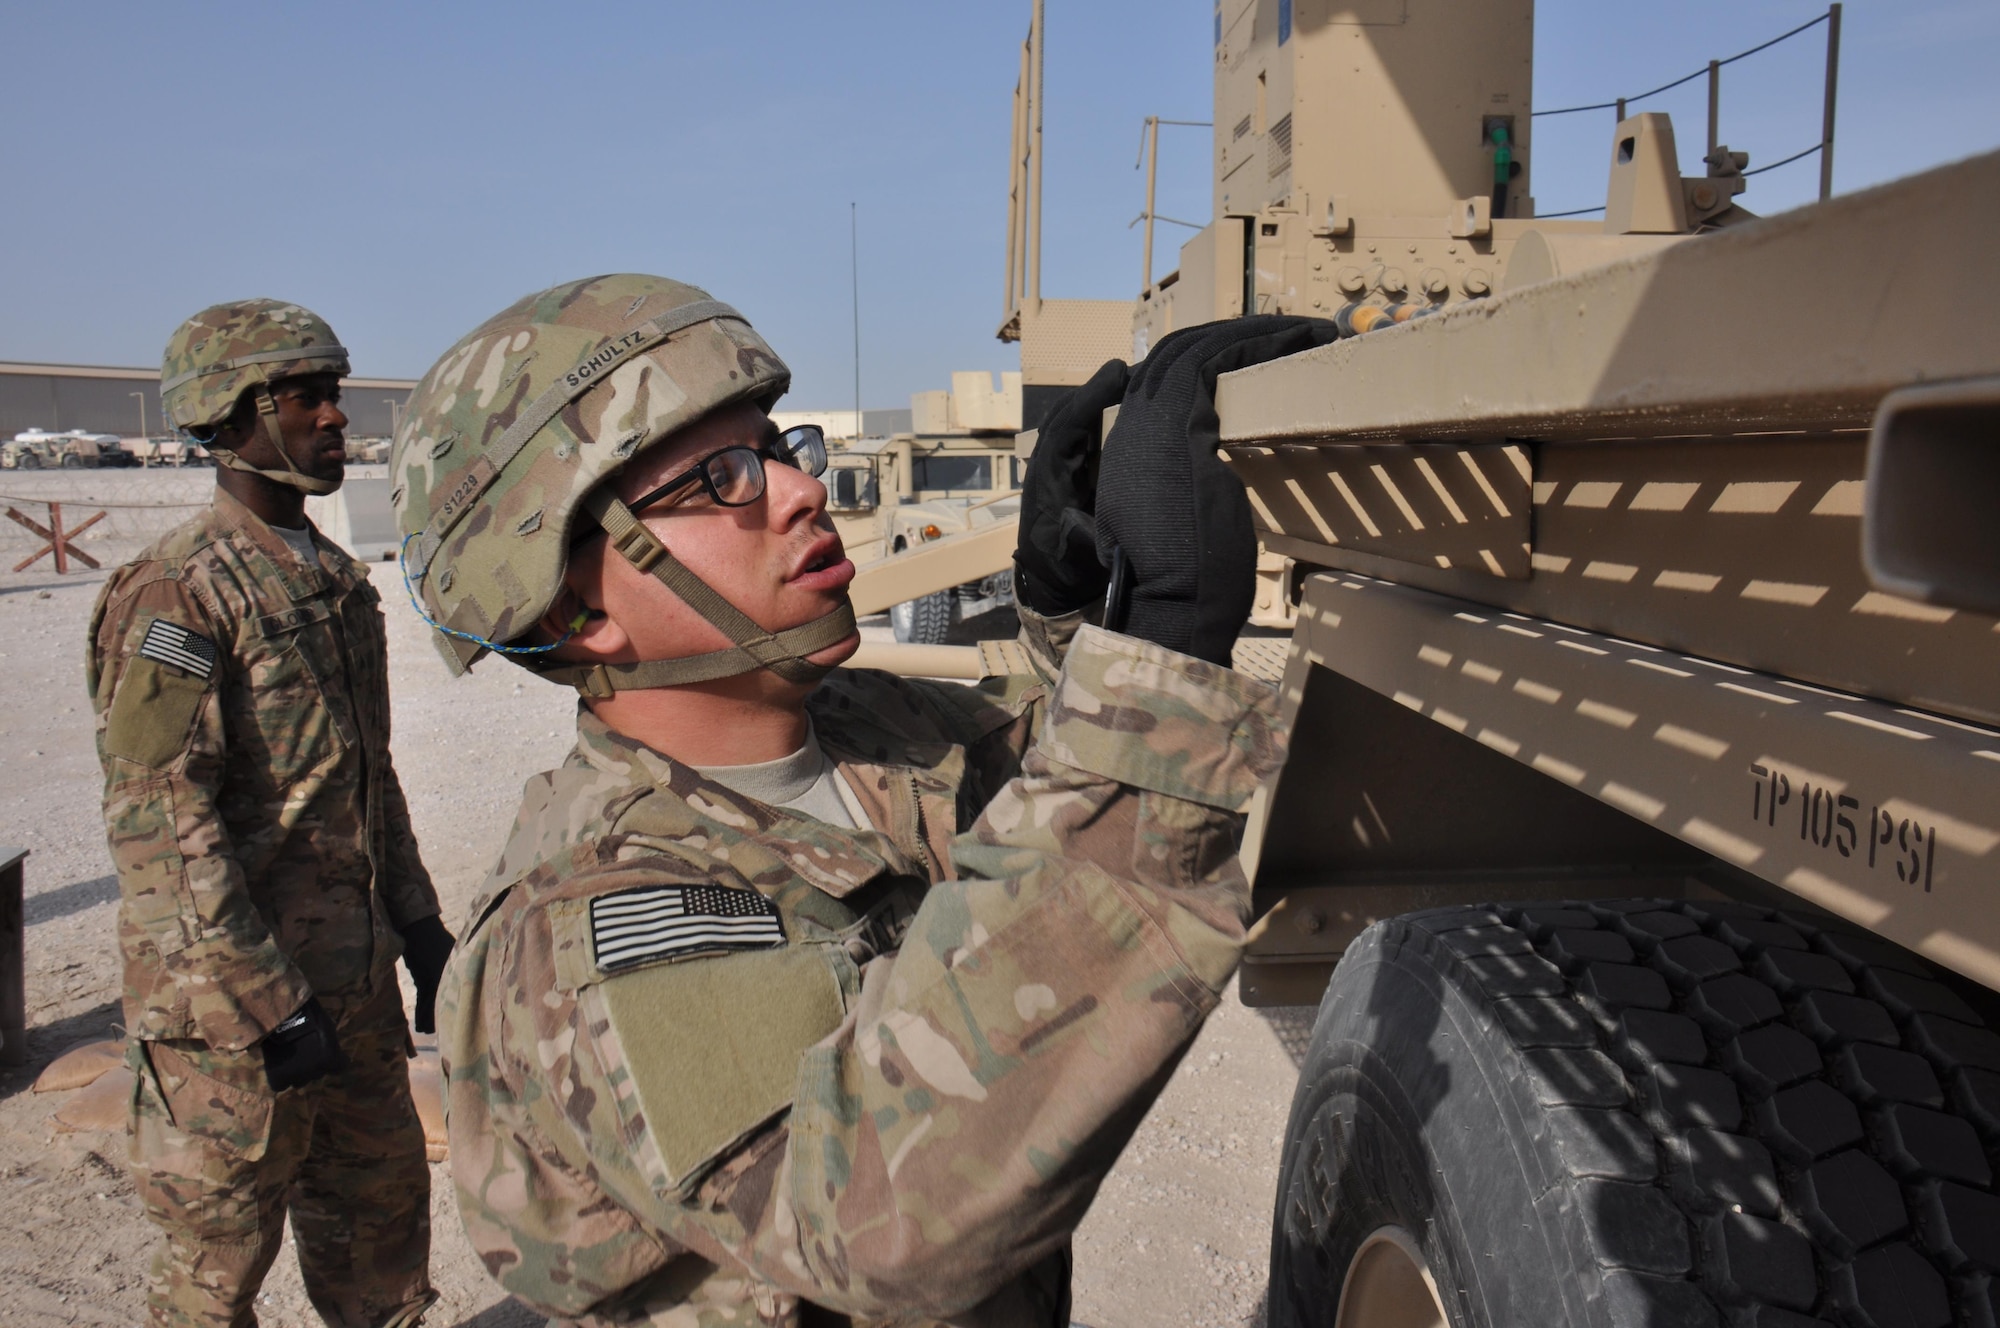 Pfc. Michael Schultz, 1-62 Delta Battery Air Defense Artillery Regiment Patriot station launcher operator and maintainer from Tampa, Florida, raises the launching station catwalks on a Patriot missile battery in preparation for reload operations during an operational readiness exercise at Al Udeid Air Base, Qatar Mar. 4. The Patriot missiles at AUAB protect the base from a variety of airborne threats including tactical ballistic missiles and drones.  (U.S. Air Force photo by Tech. Sgt. James Hodgman/Released)